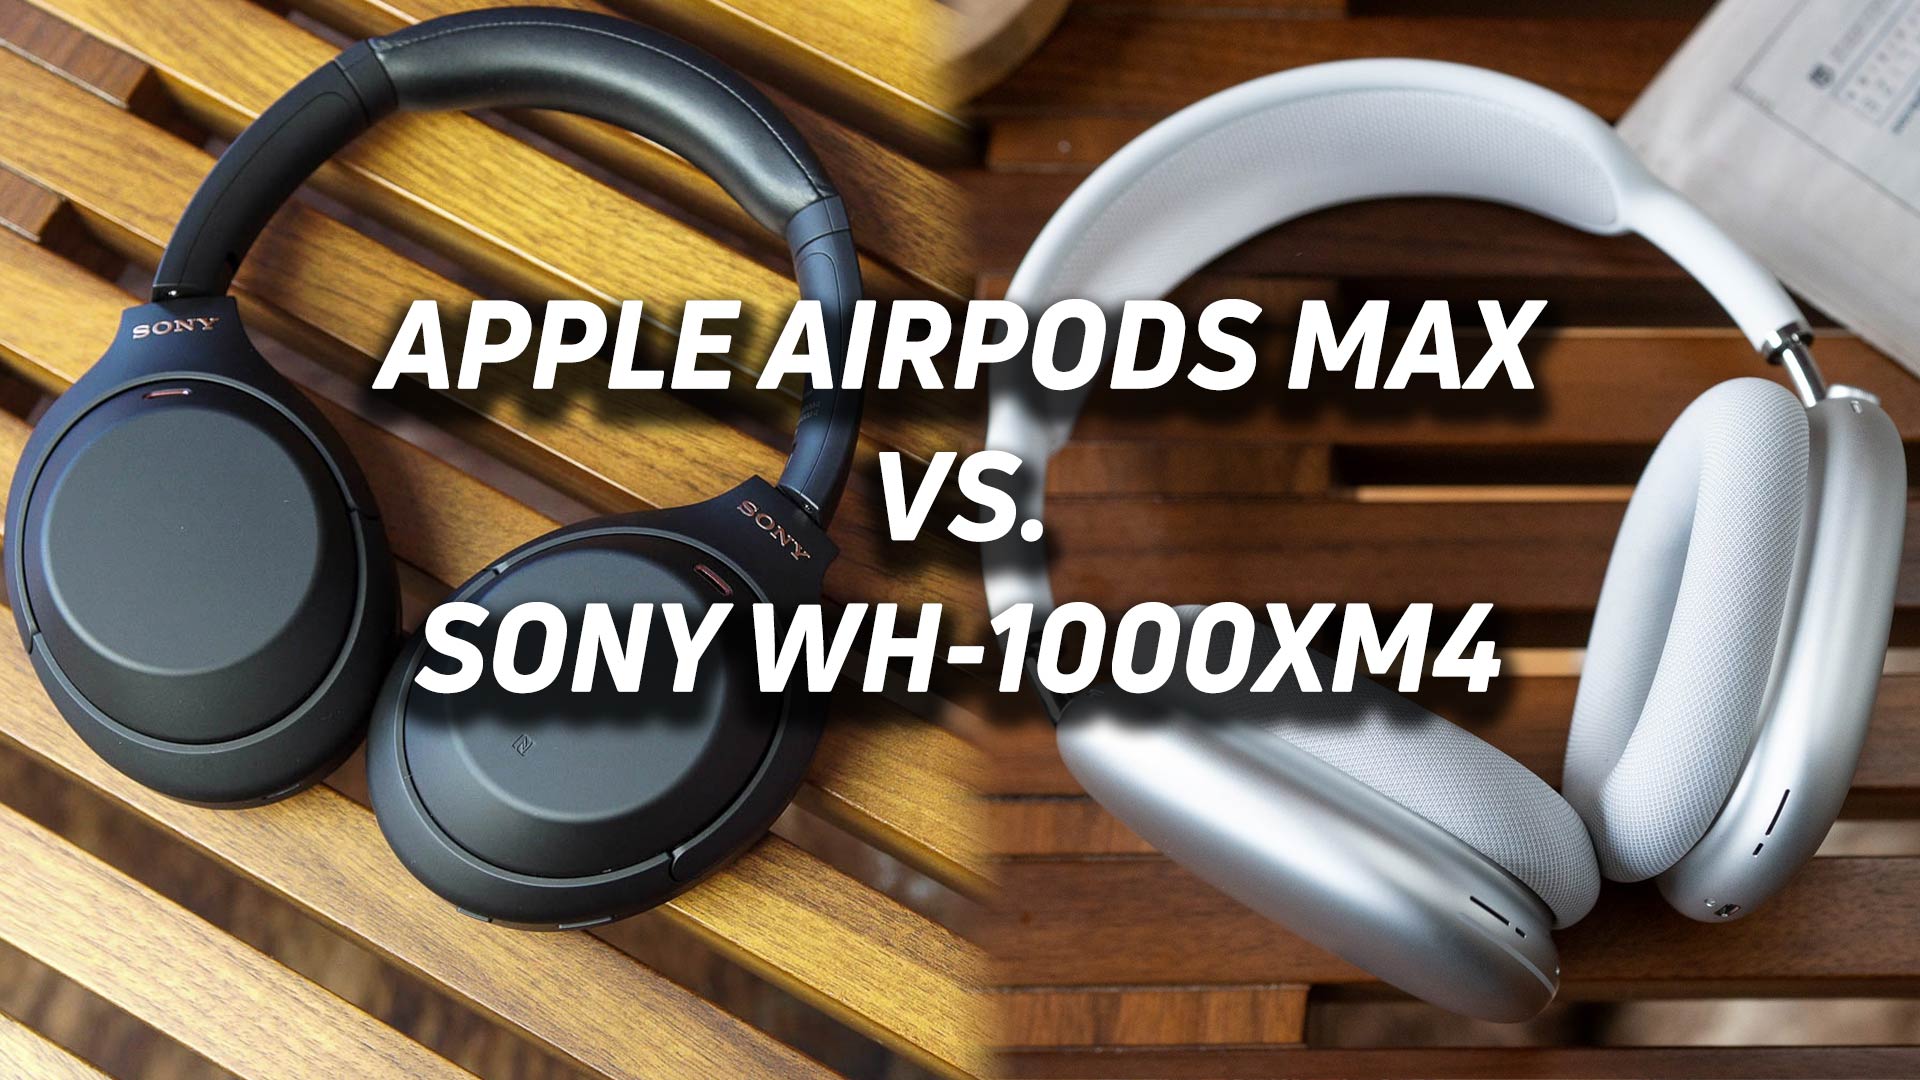 Apple AirPods Max vs Sony WH-1000XM4 - SoundGuys